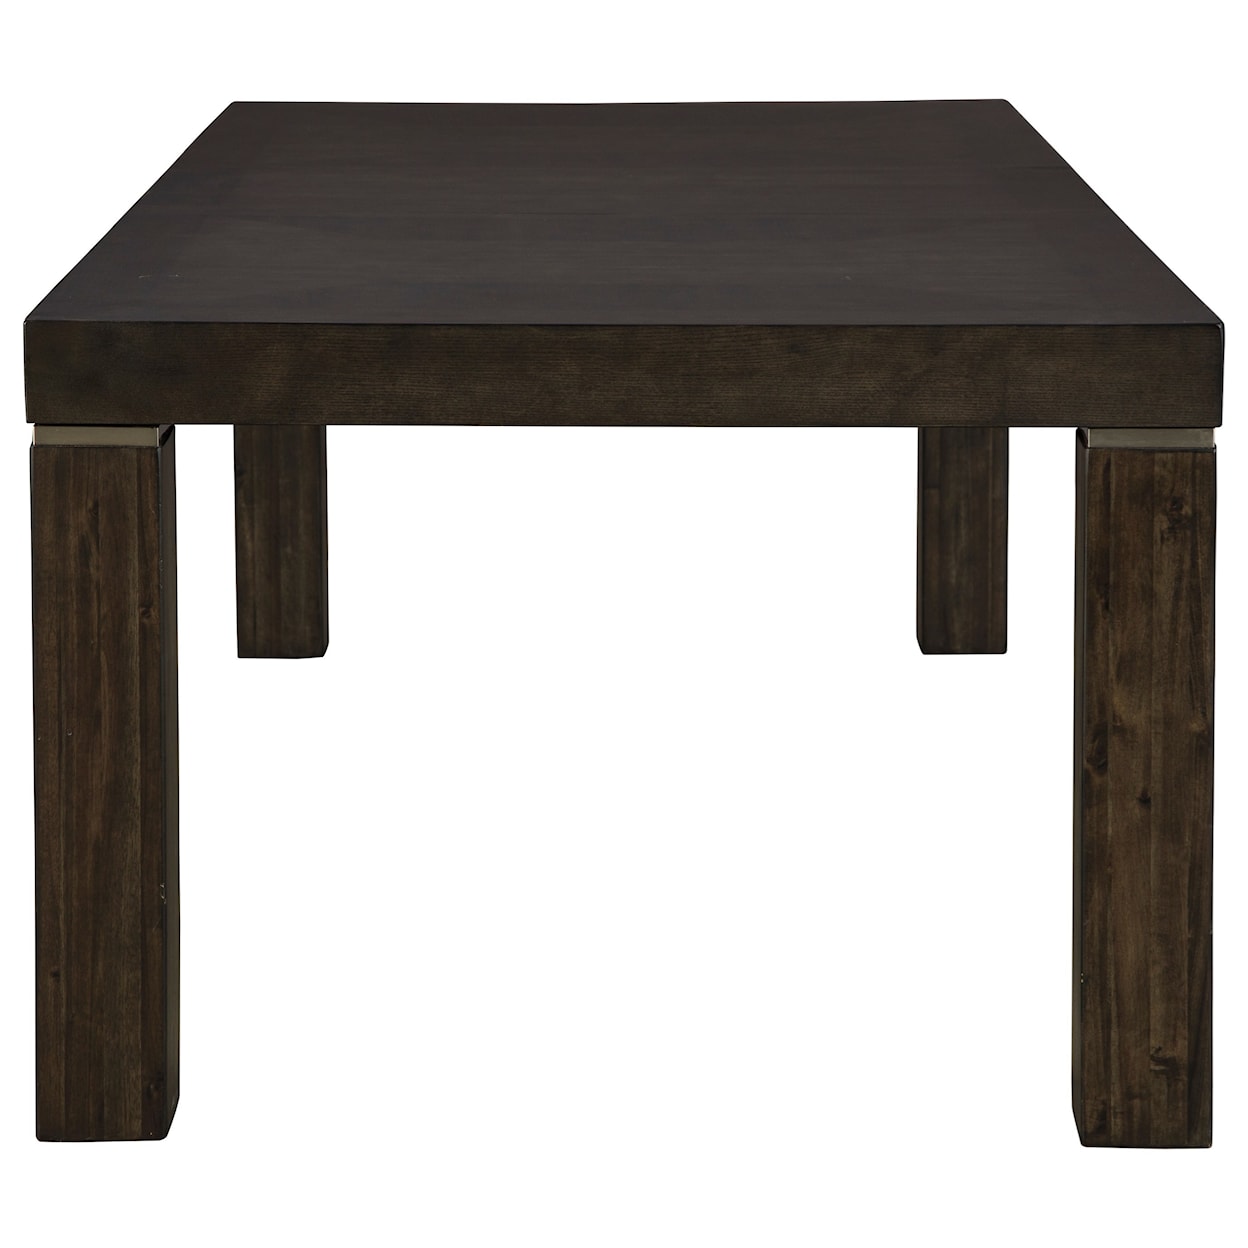 Signature Design by Ashley Furniture Hyndell Rectangular Dining Room Extension Table